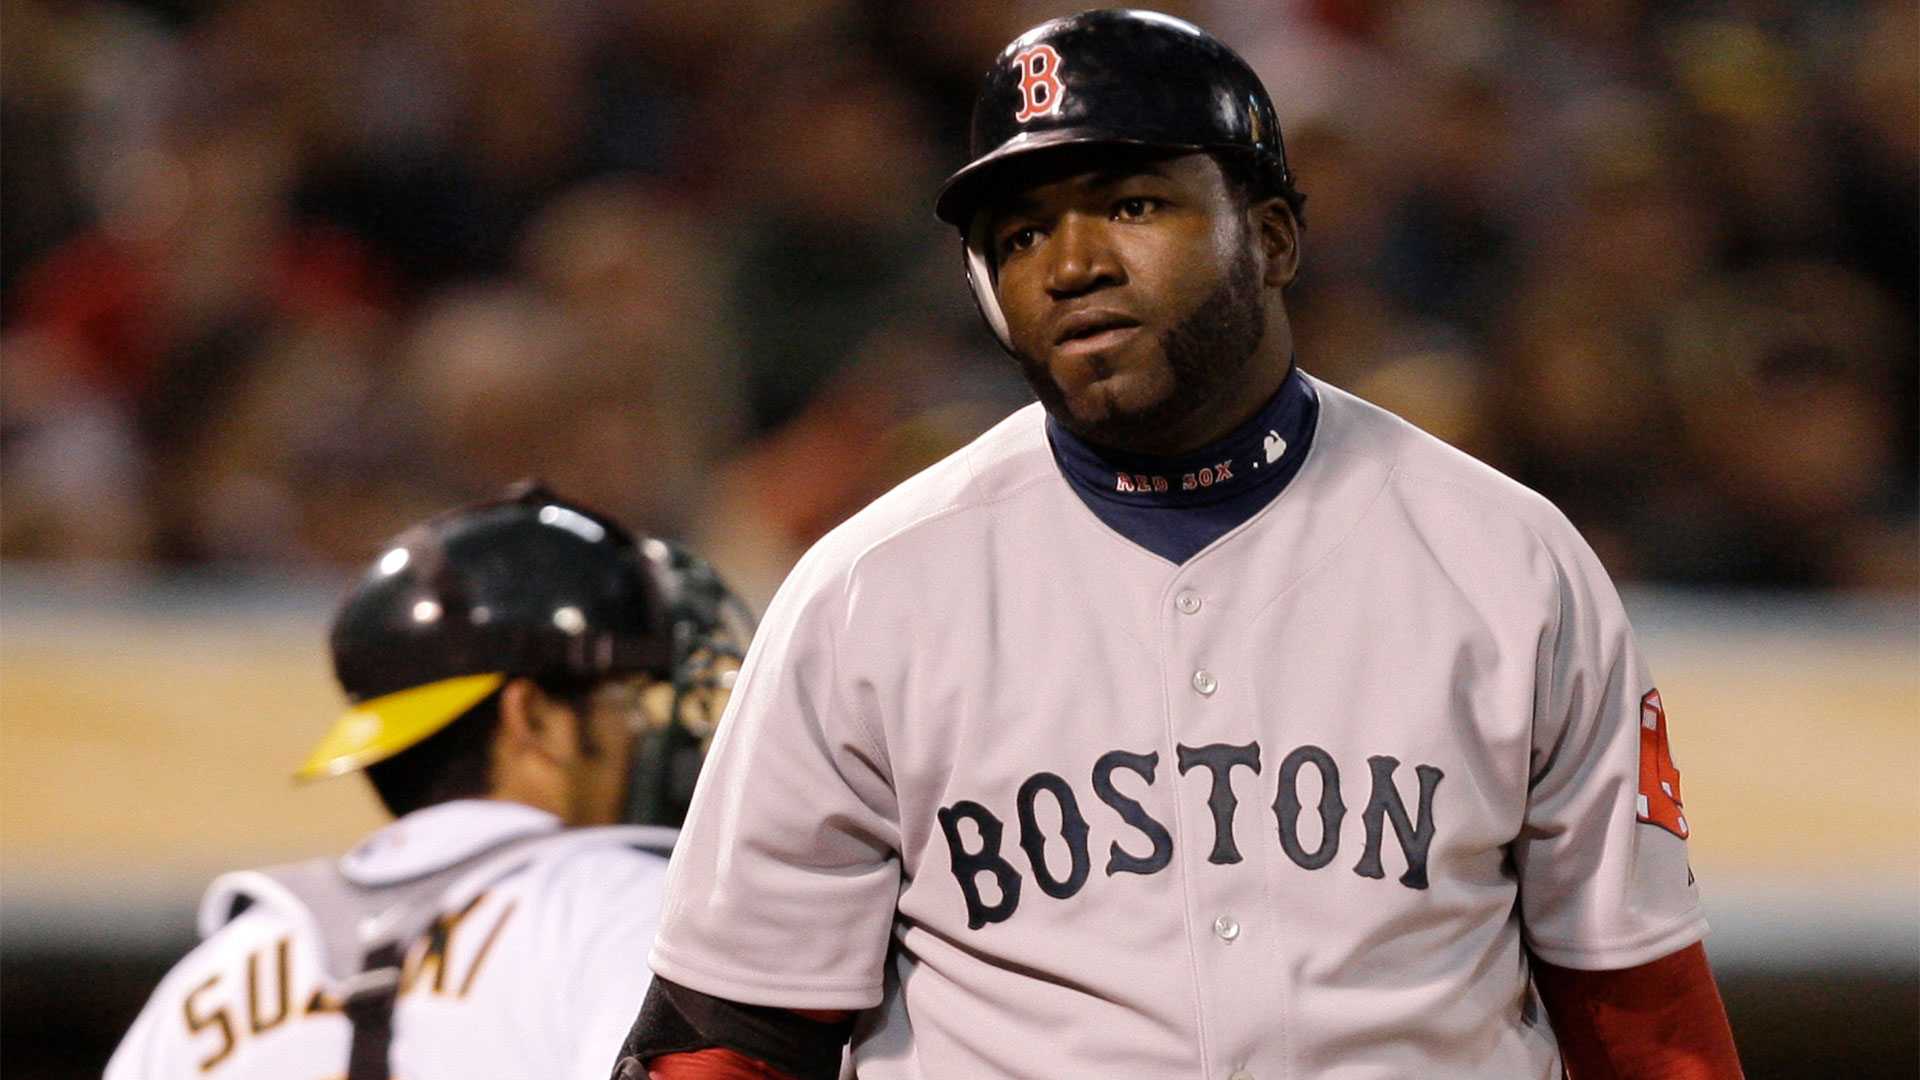 Red Sox legend David Ortiz says hes being extorted by hacker